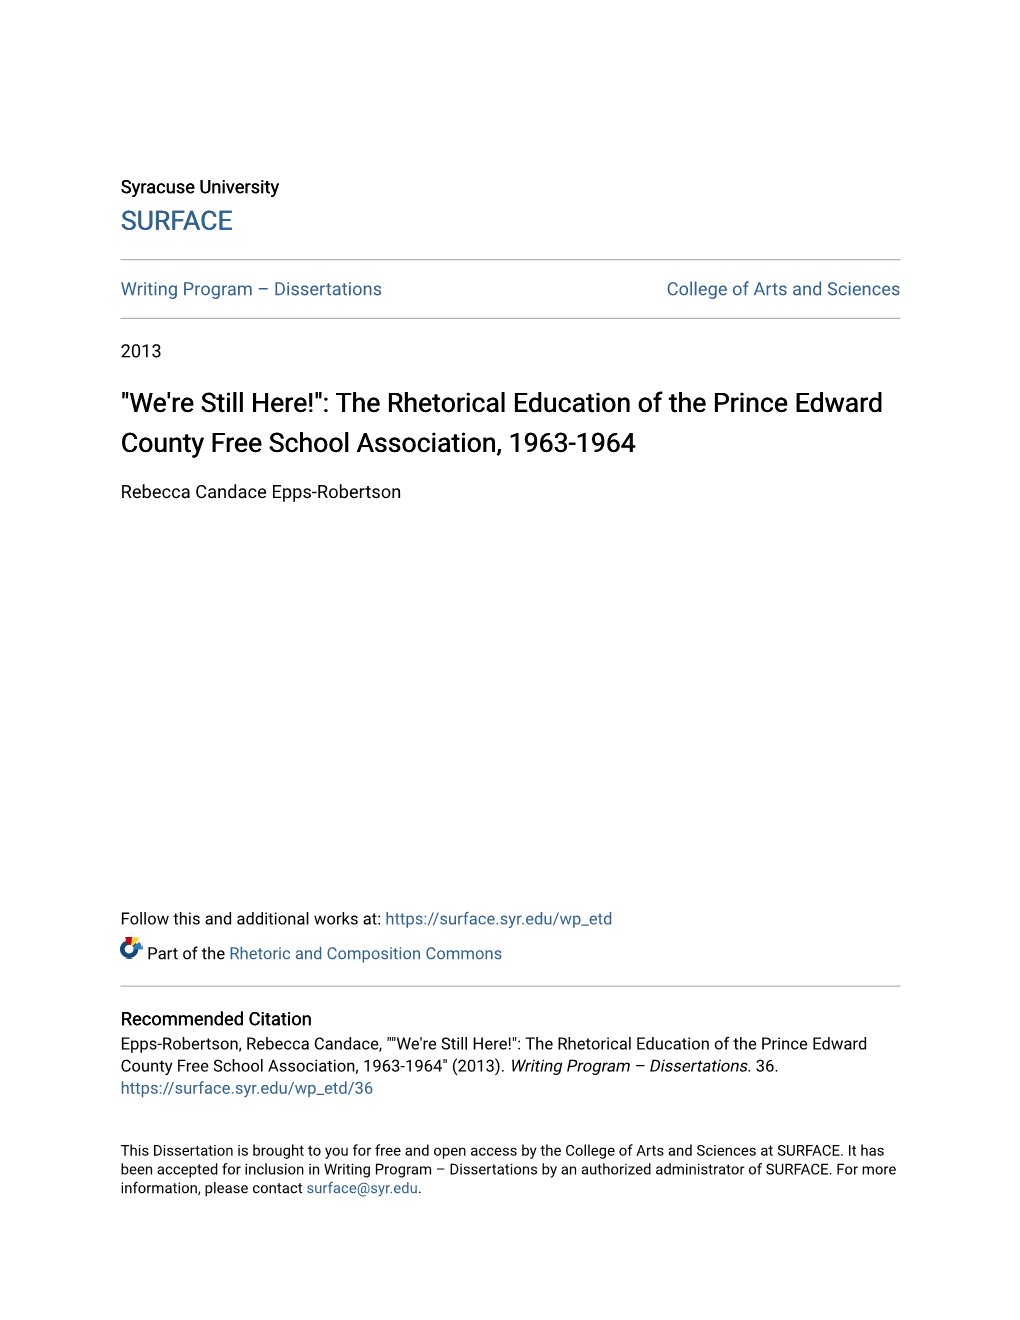 "We're Still Here!": the Rhetorical Education of the Prince Edward County Free School Association, 1963-1964